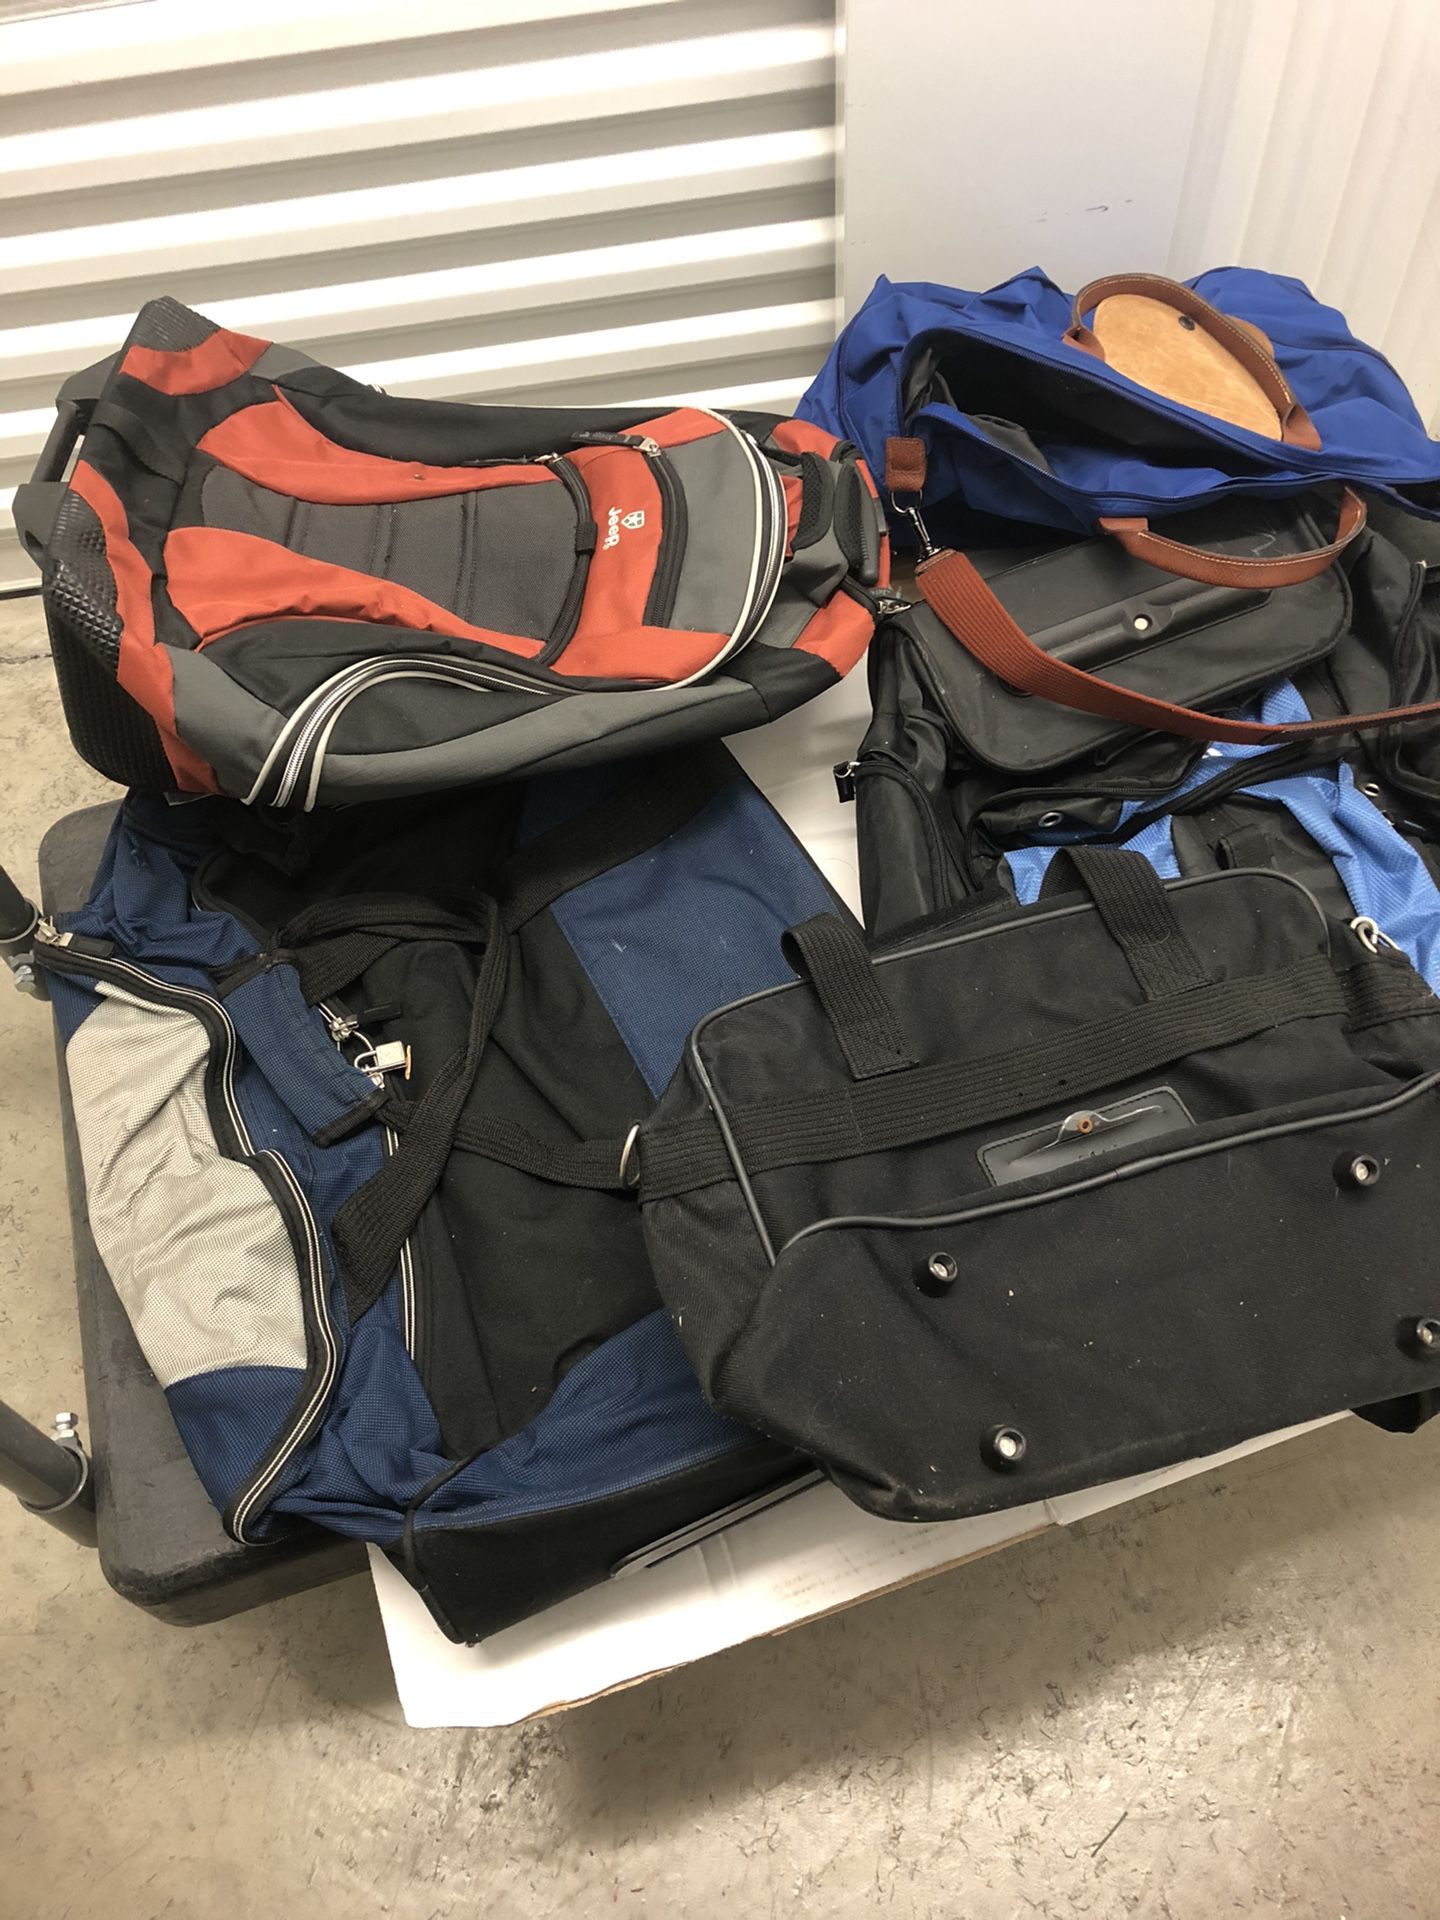 Carry bags and ruck